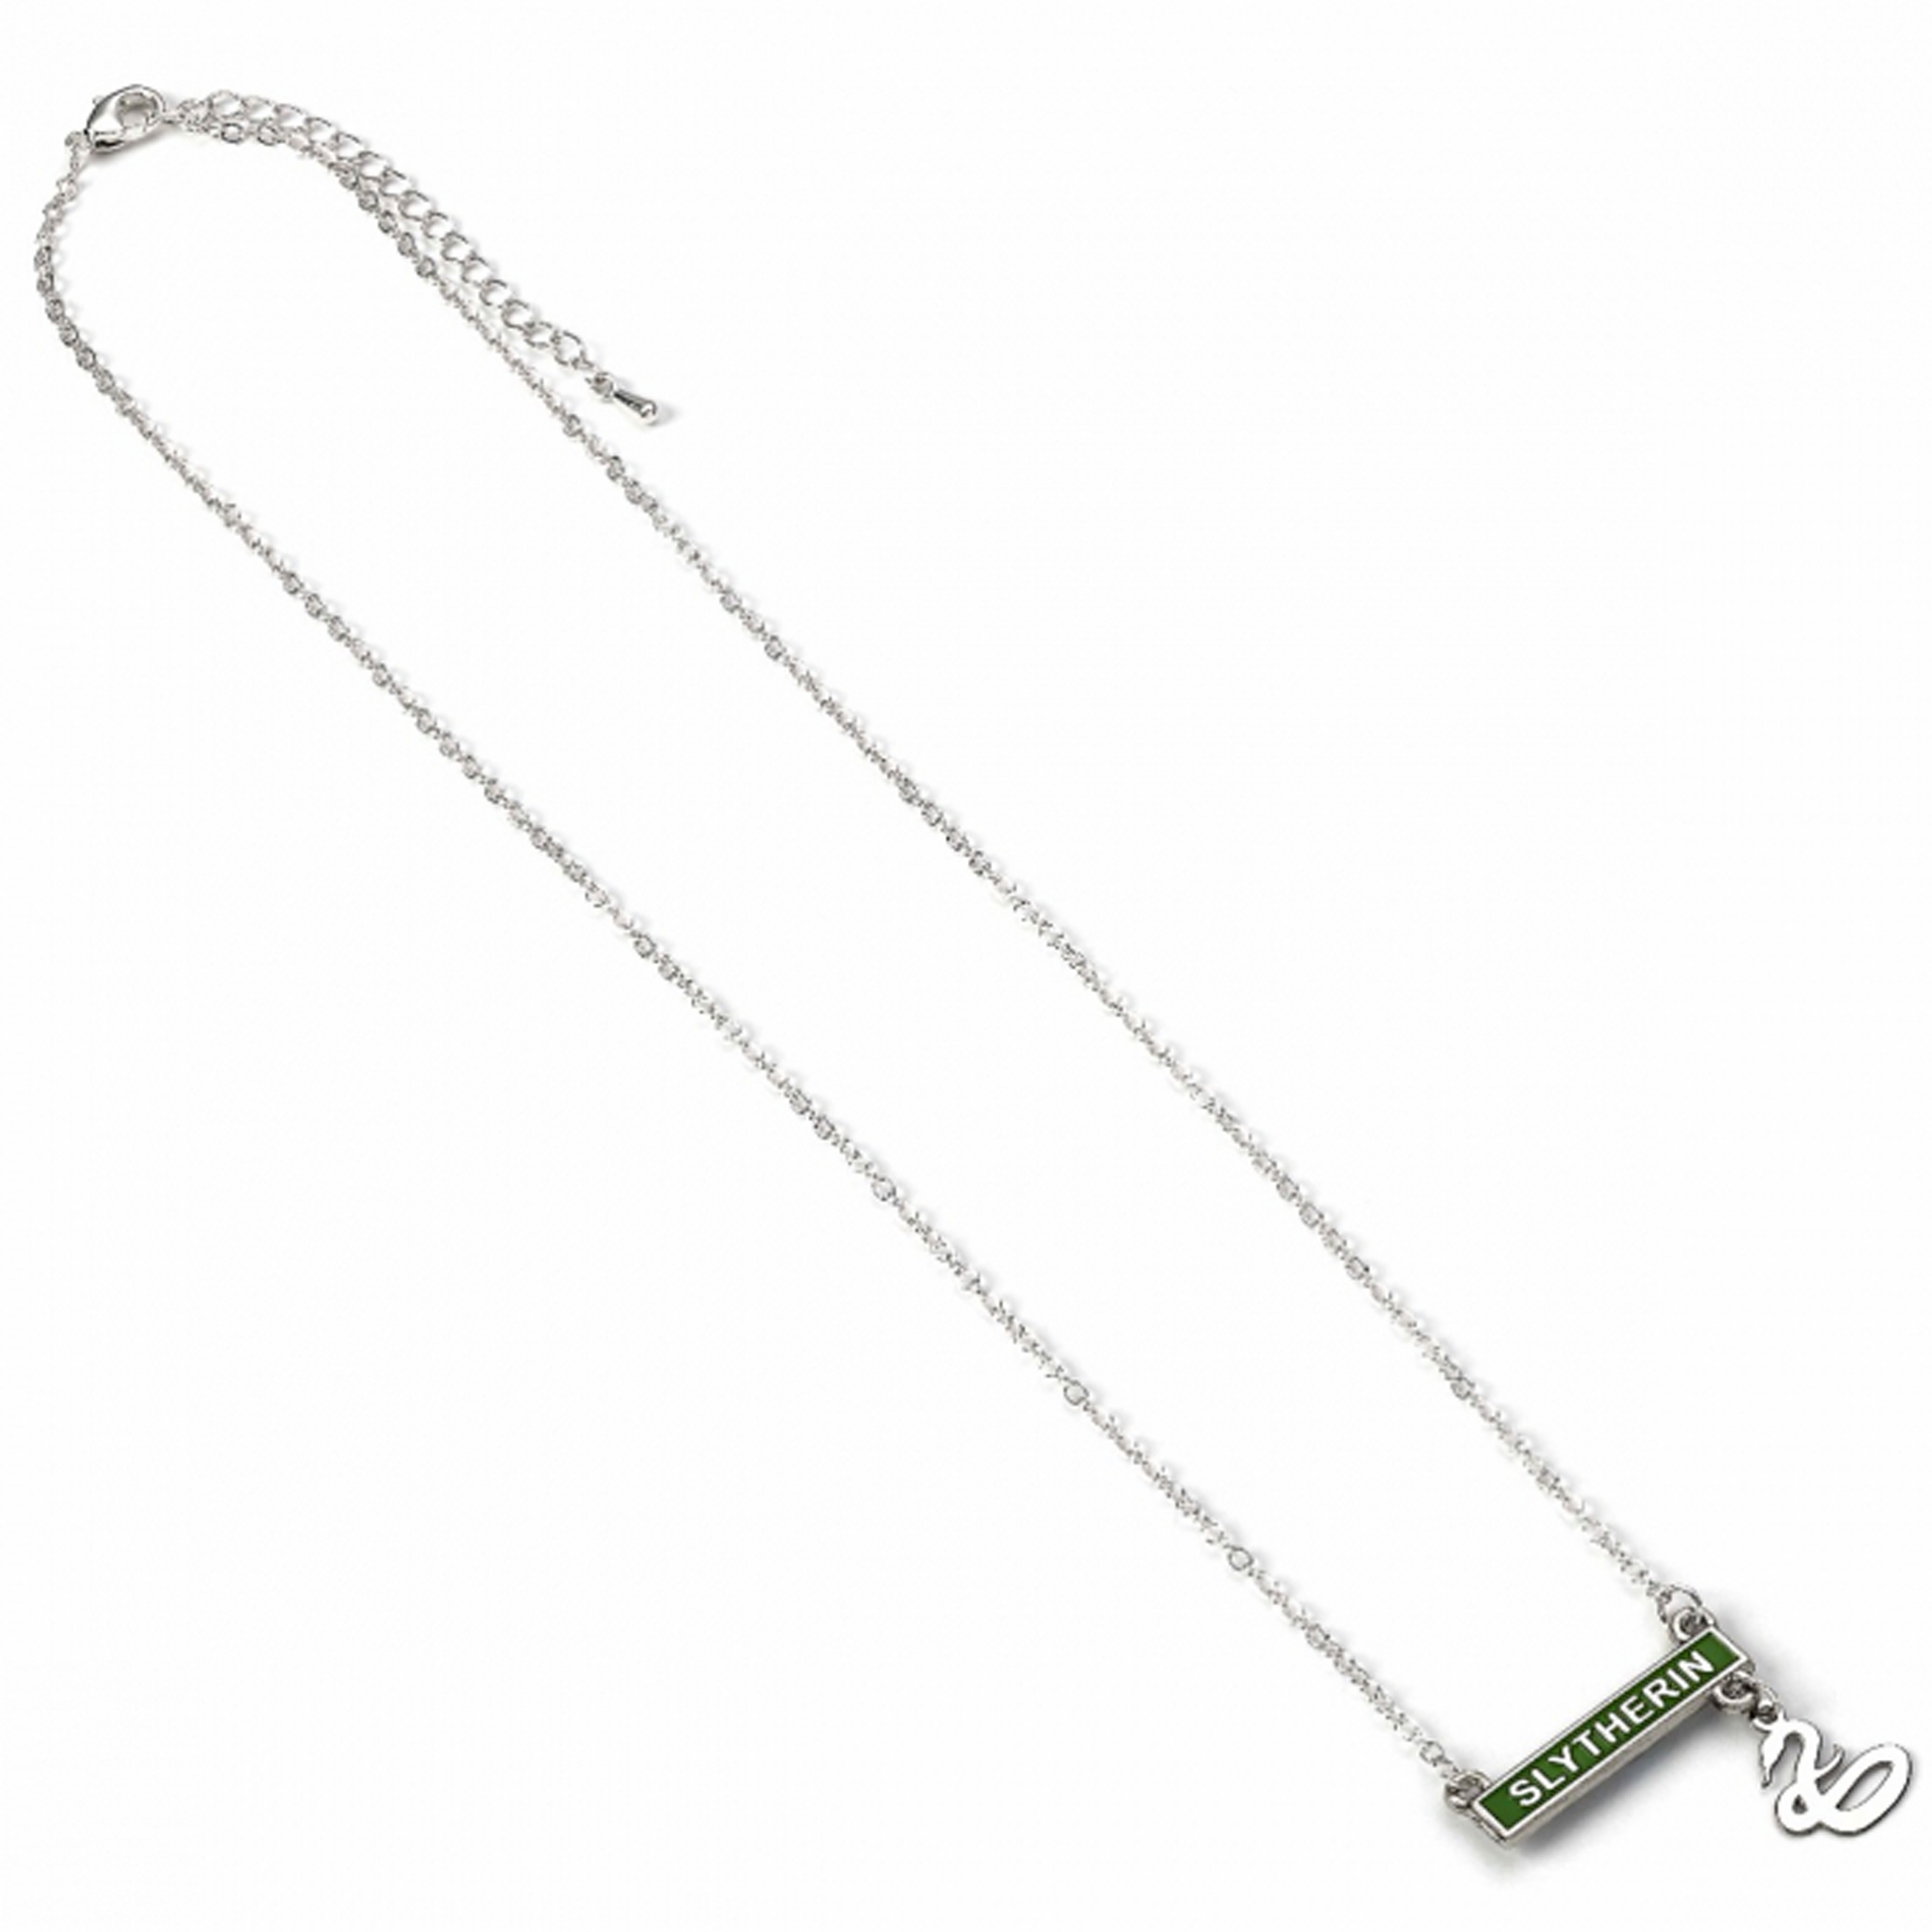 Slytherin - Harry Potter Hogwarts House Bar Necklace (Pendant and Chain) | Happy Piranha